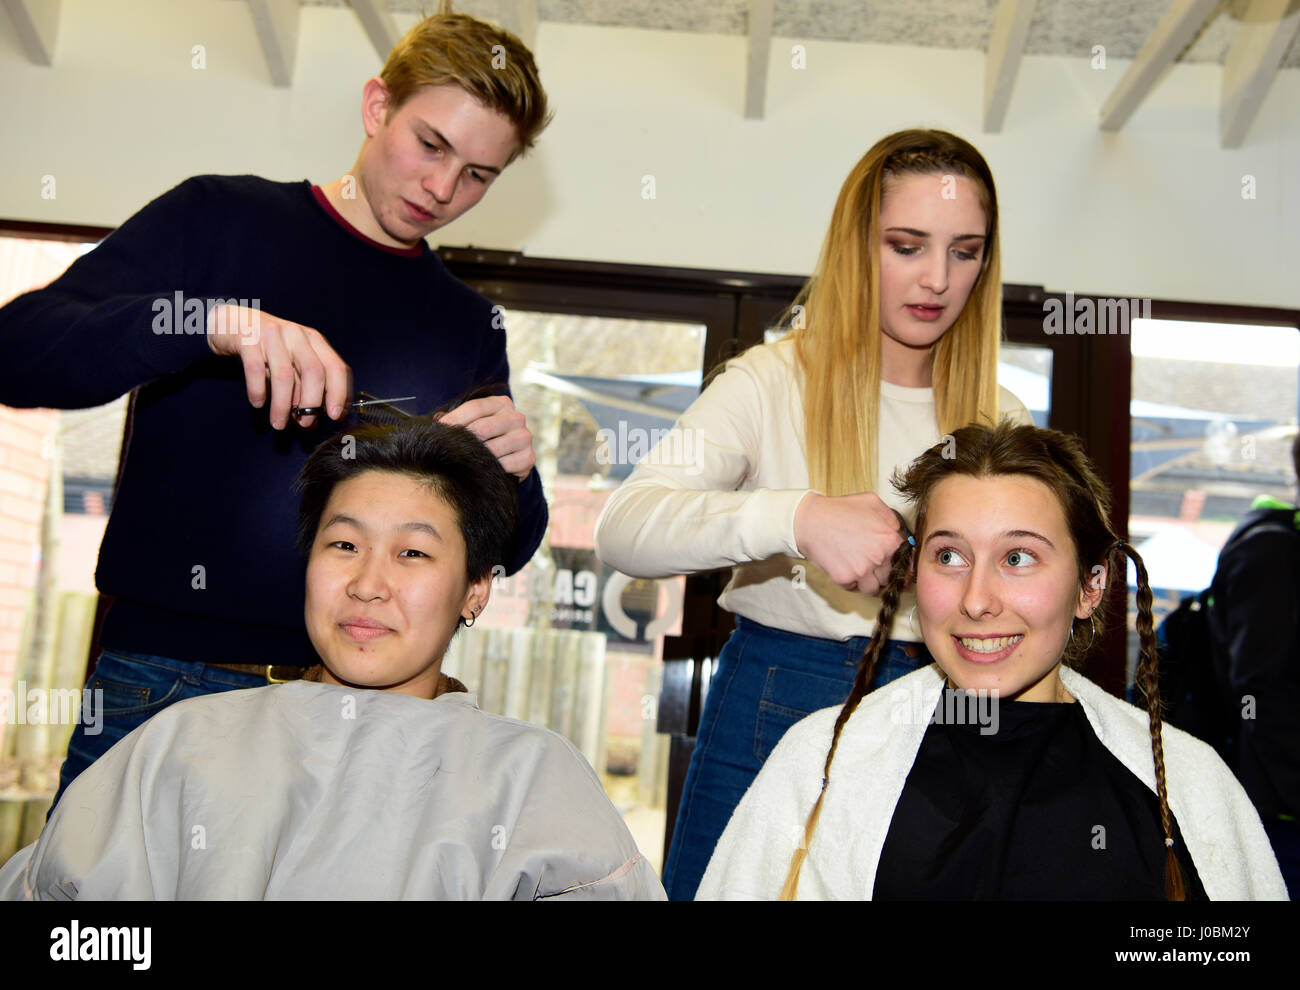 Two 18 year old college girls having their heads shaved by fellow students to help raise funds for Cancer Research, Alton, Hampshire, UK. 31.03.2017. Stock Photo